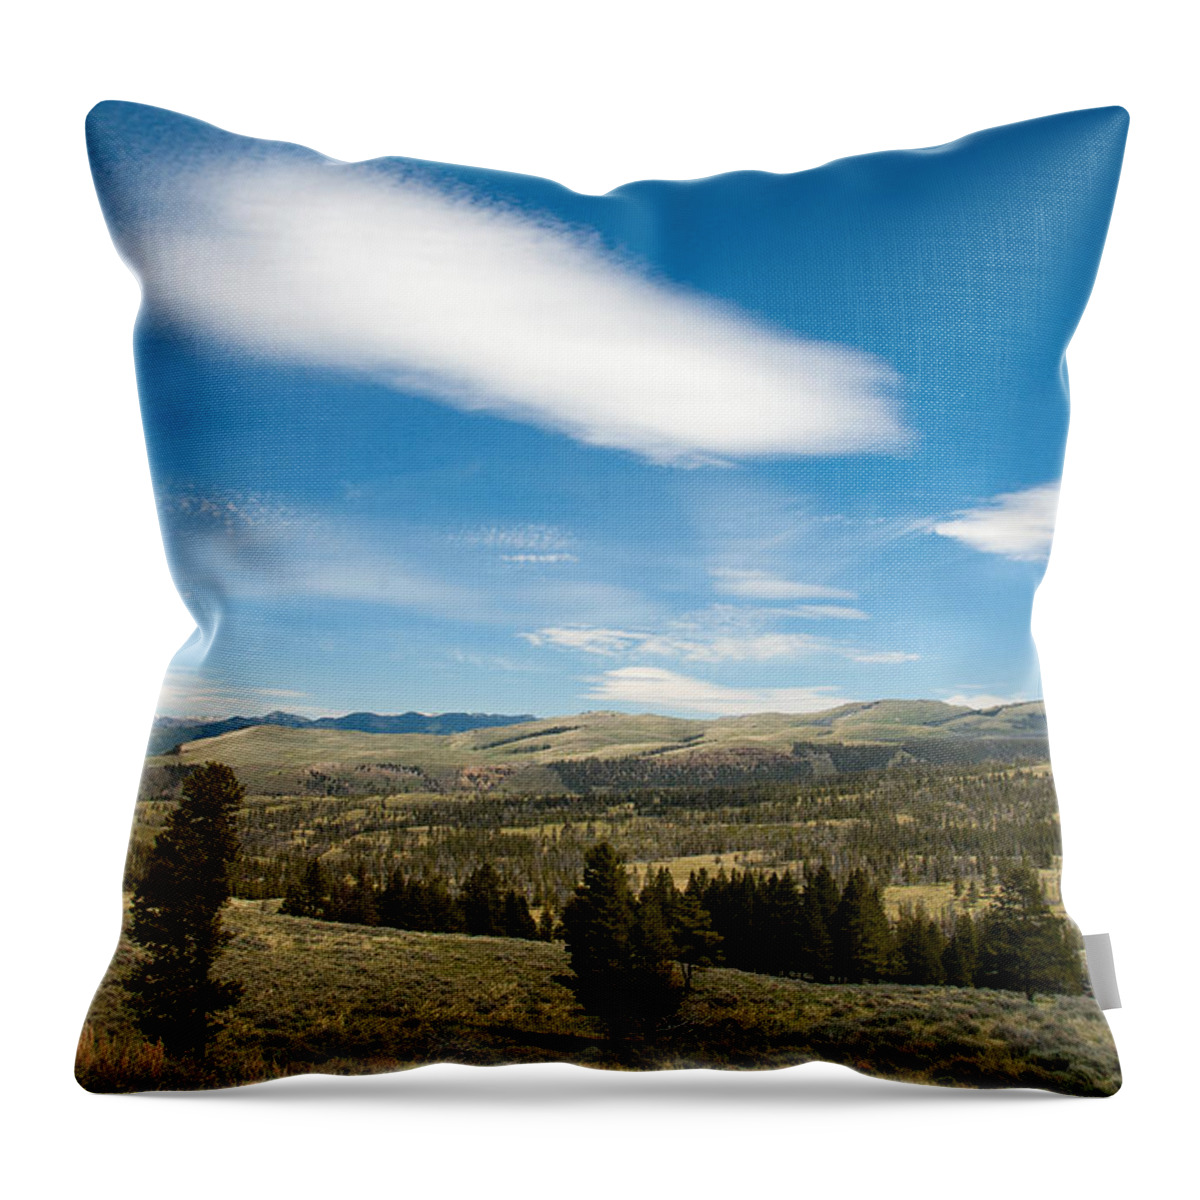 Yellowstone Throw Pillow featuring the photograph Yellowstone Skies by Steve Stuller